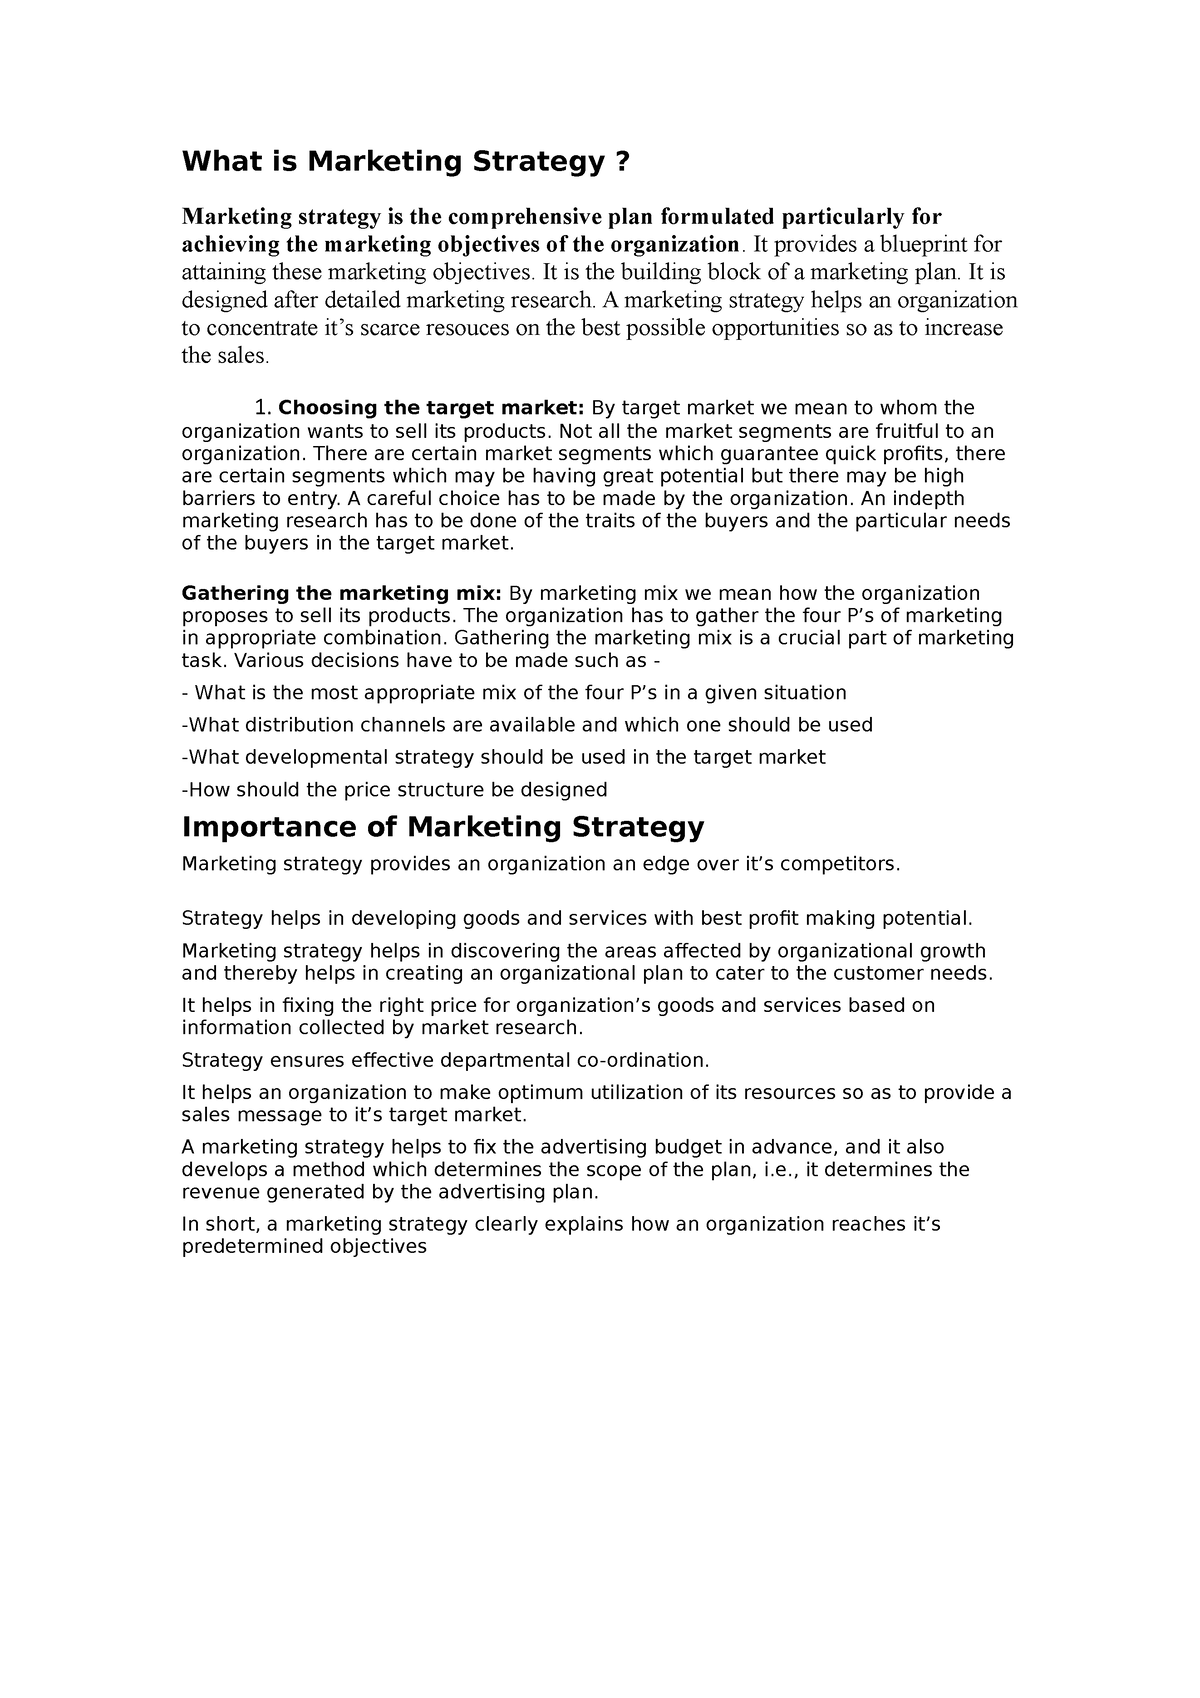 marketing strategy thesis